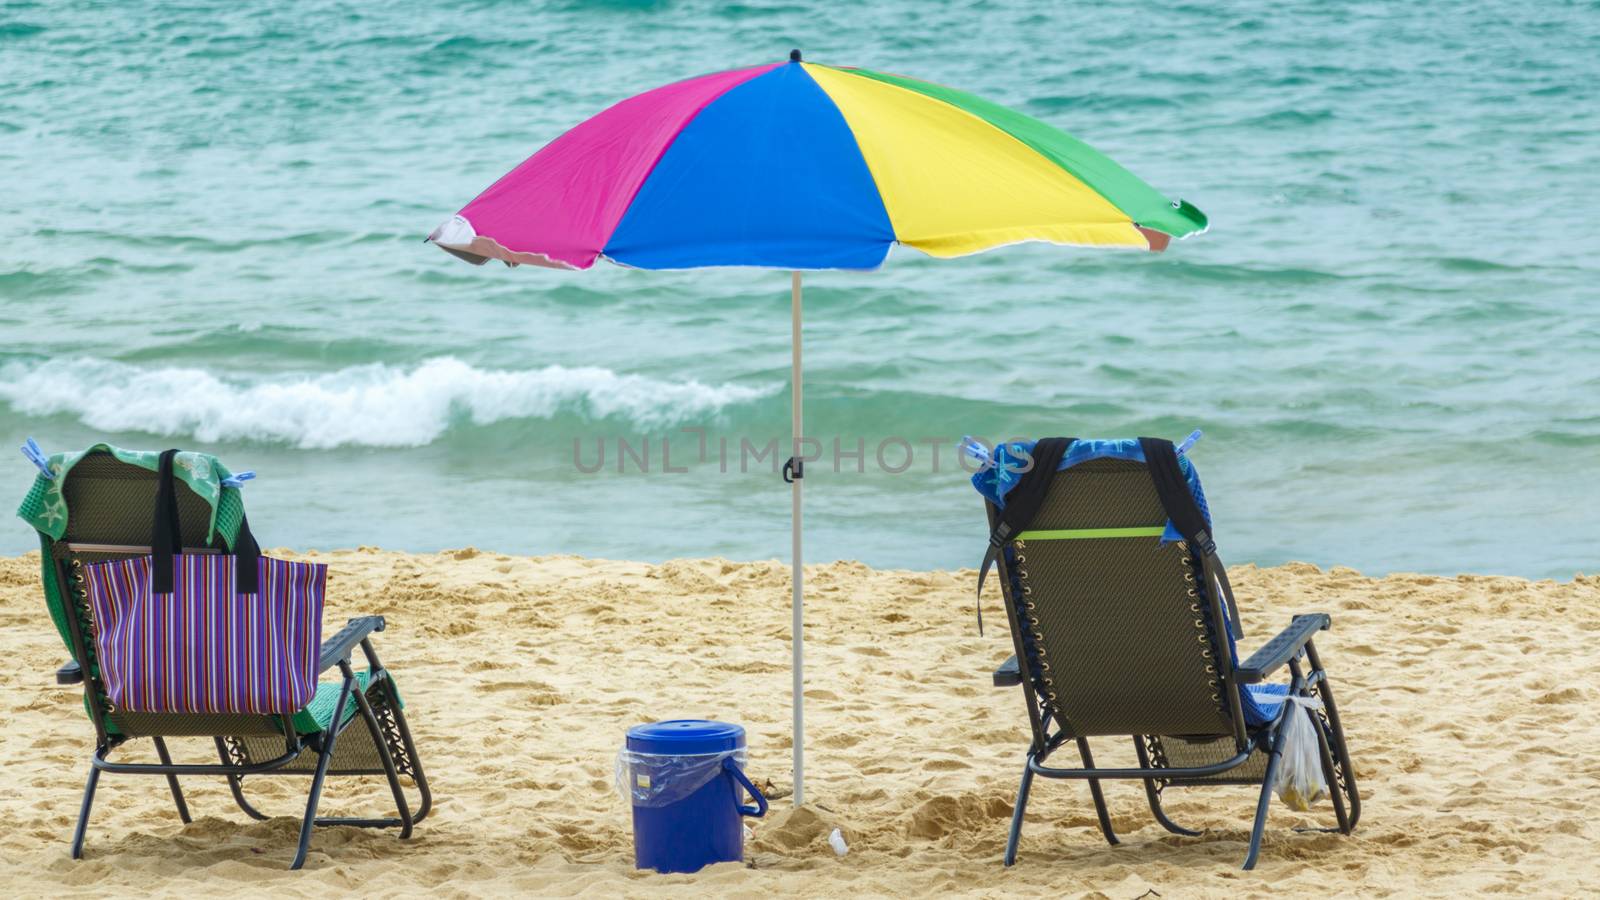 Two deck chairs, parasol and a portable fridge - everything for a relaxing holiday